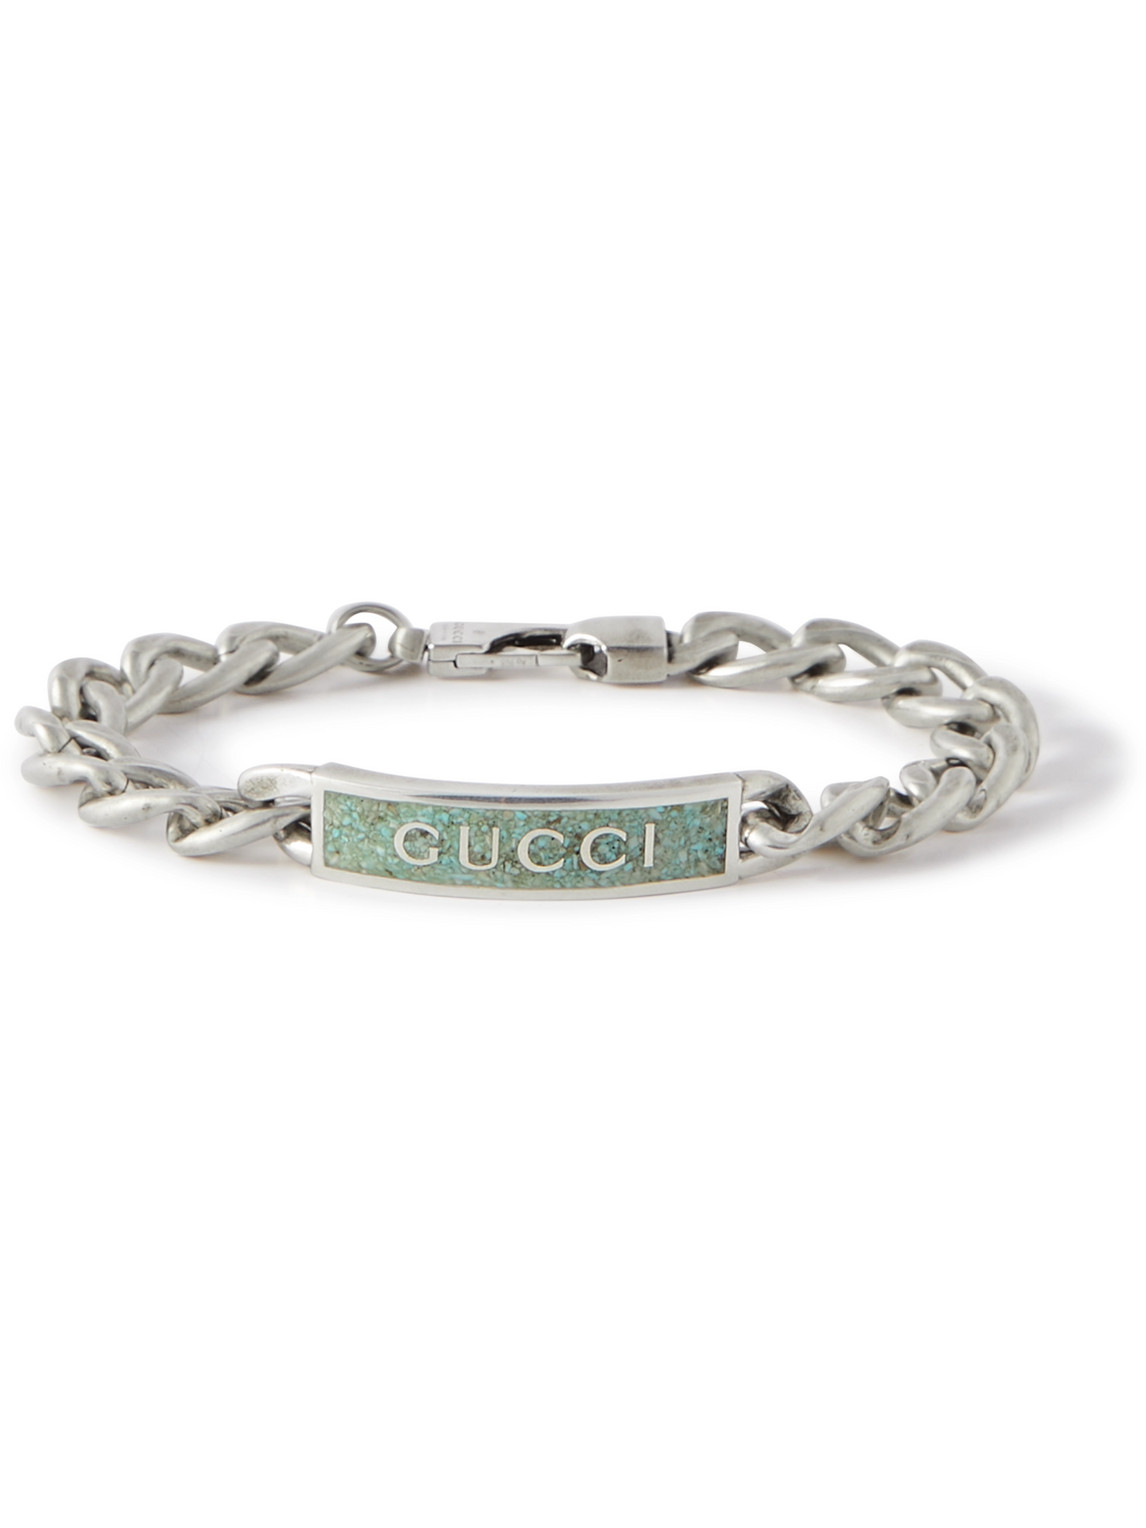 GUCCI STERLING SILVER AND ENAMEL CHAIN BRACELET